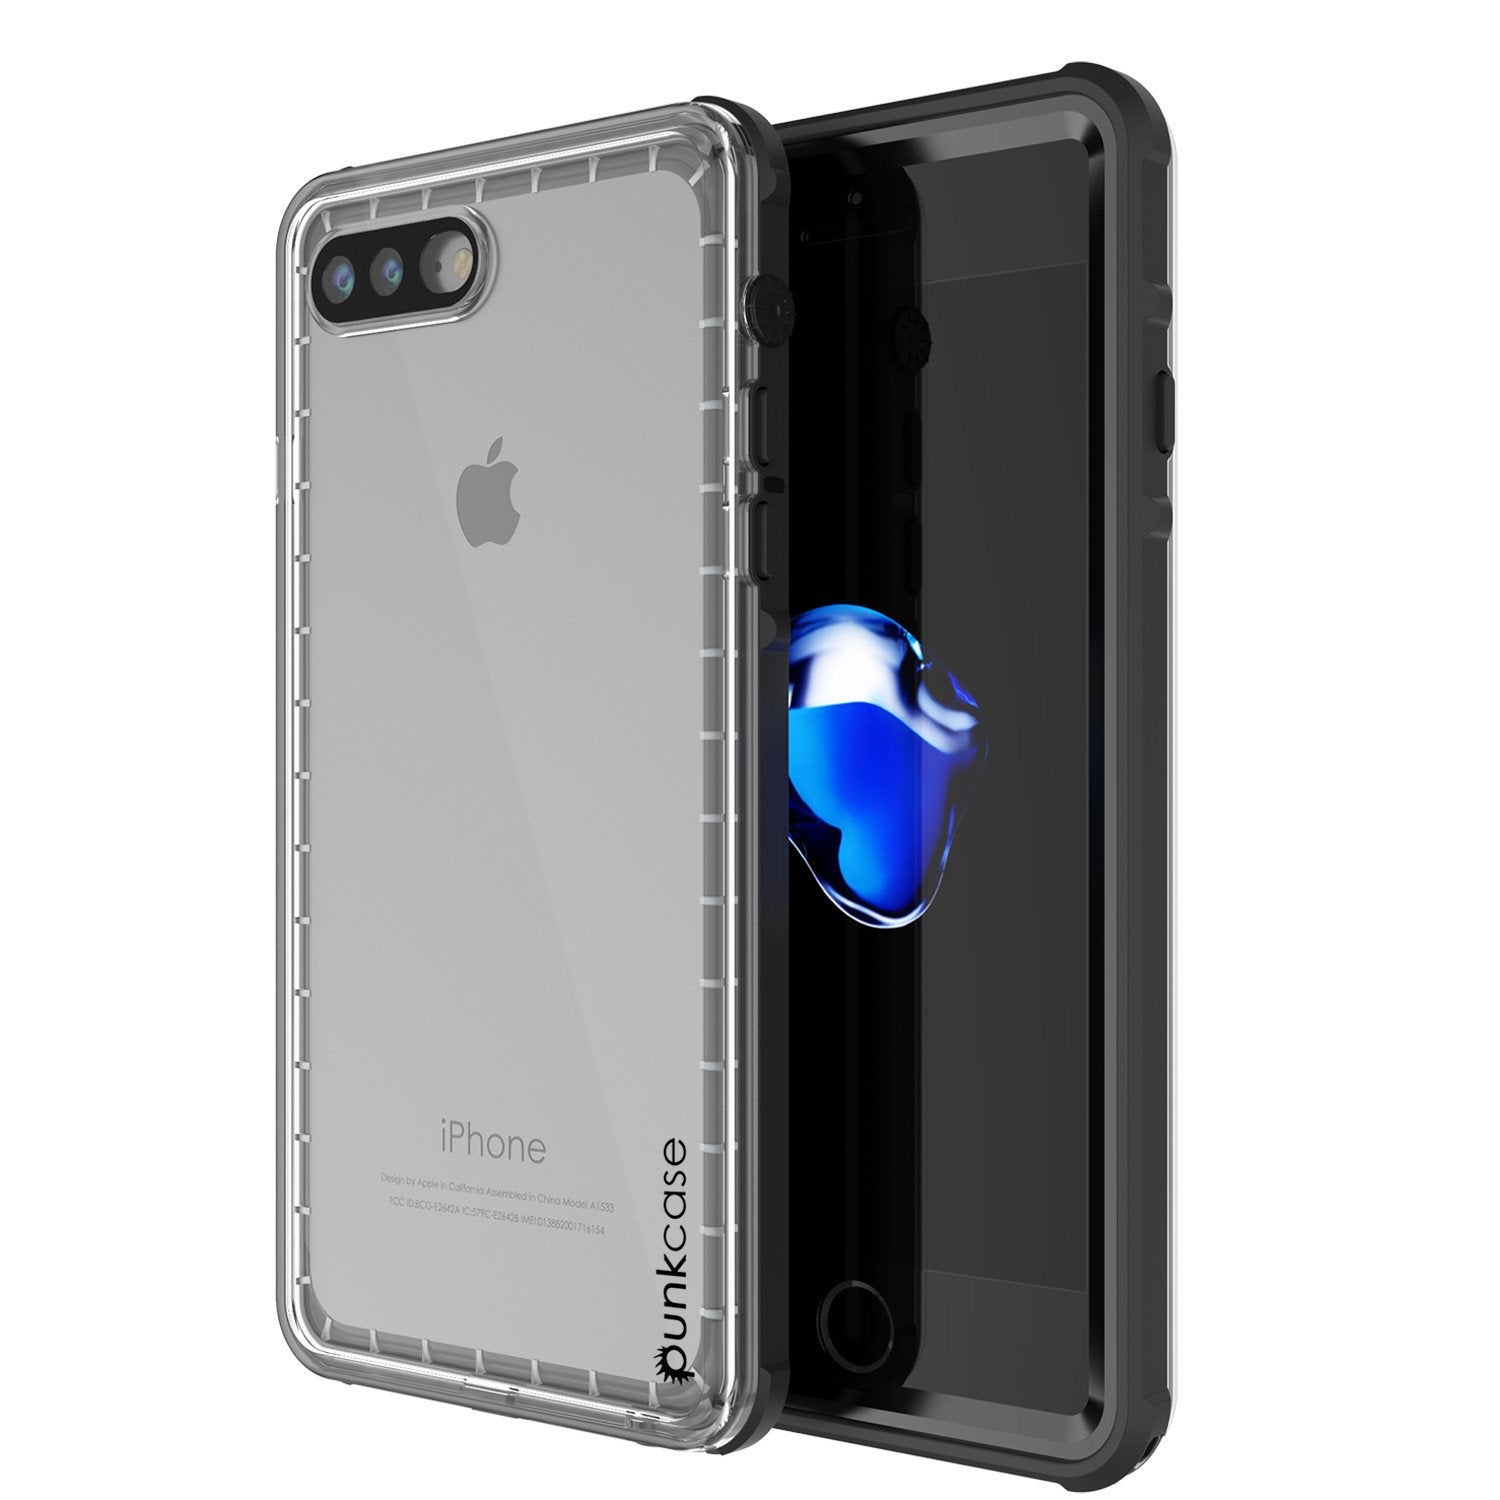 iPhone 7+ Plus Waterproof Case, PUNKcase CRYSTAL Black W/ Attached Screen Protector  | Warranty